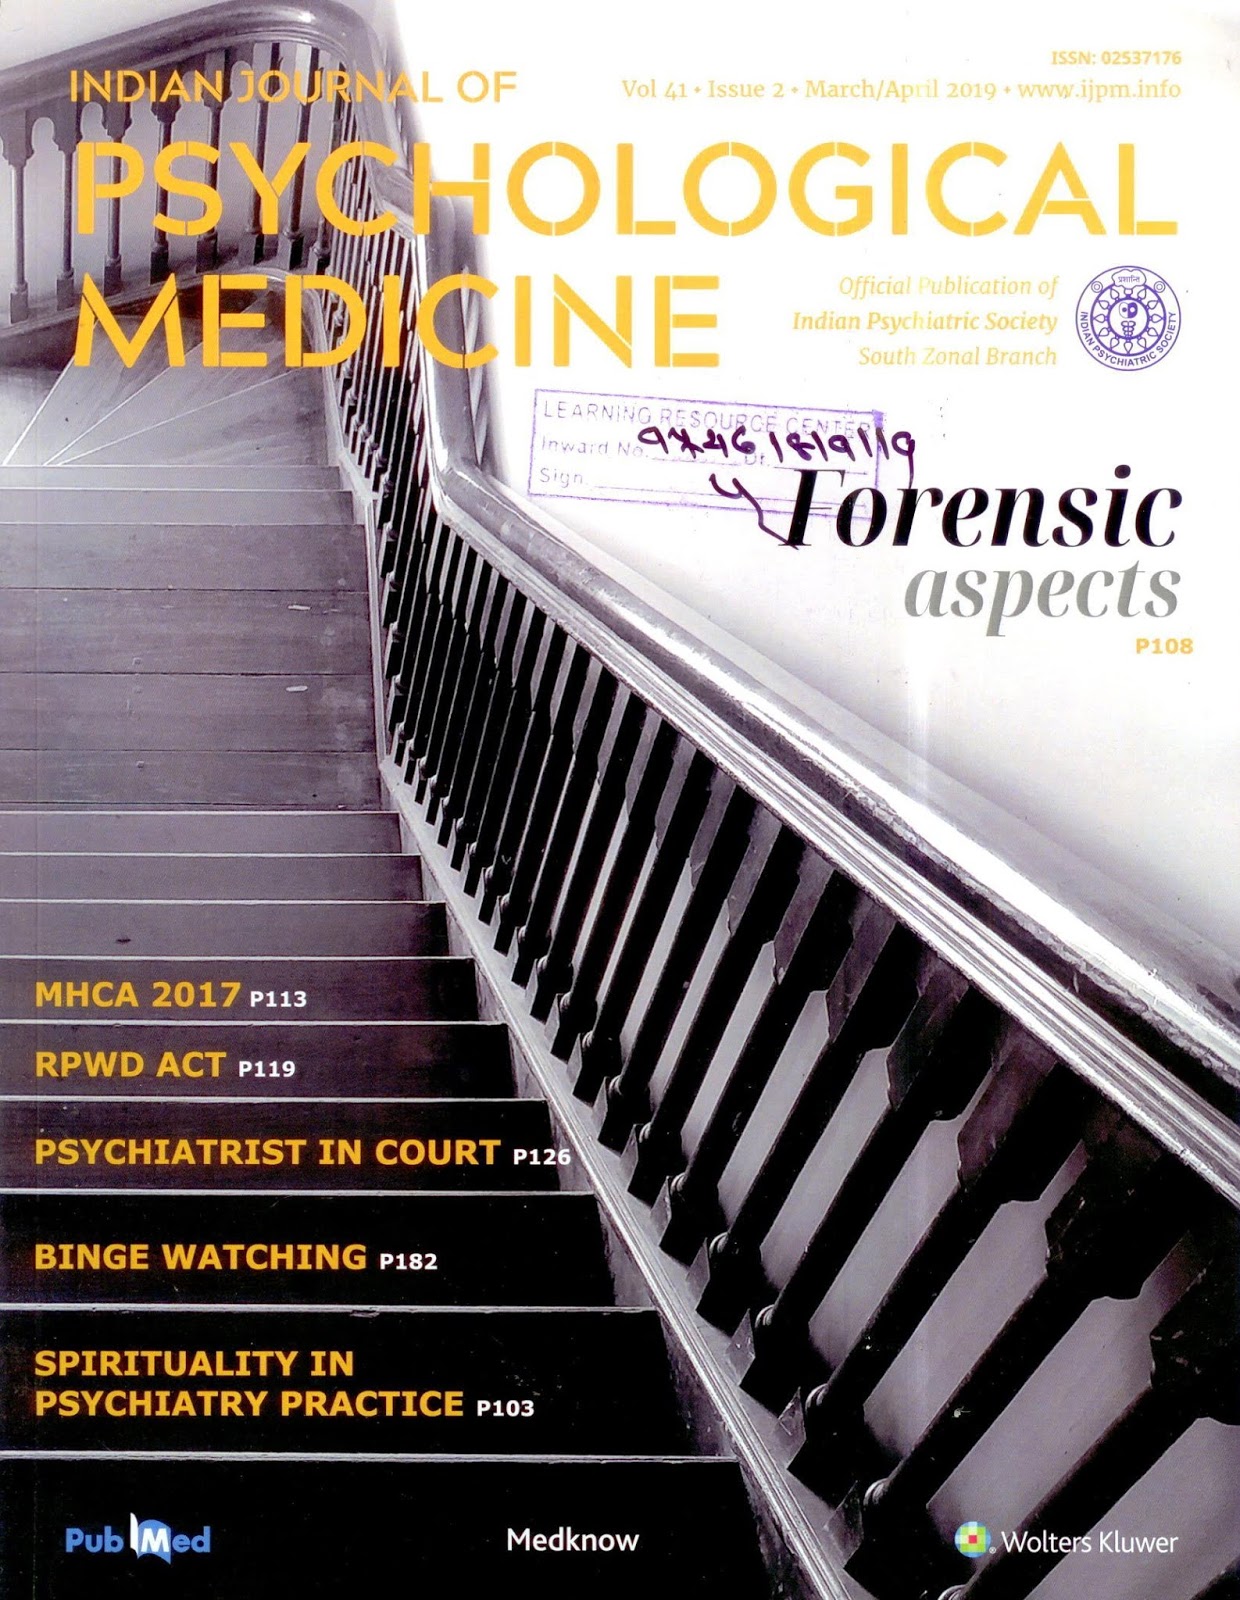 http://www.ijpm.info/showBackIssue.asp?issn=0253-7176;year=2019;volume=41;issue=2;month=March-April